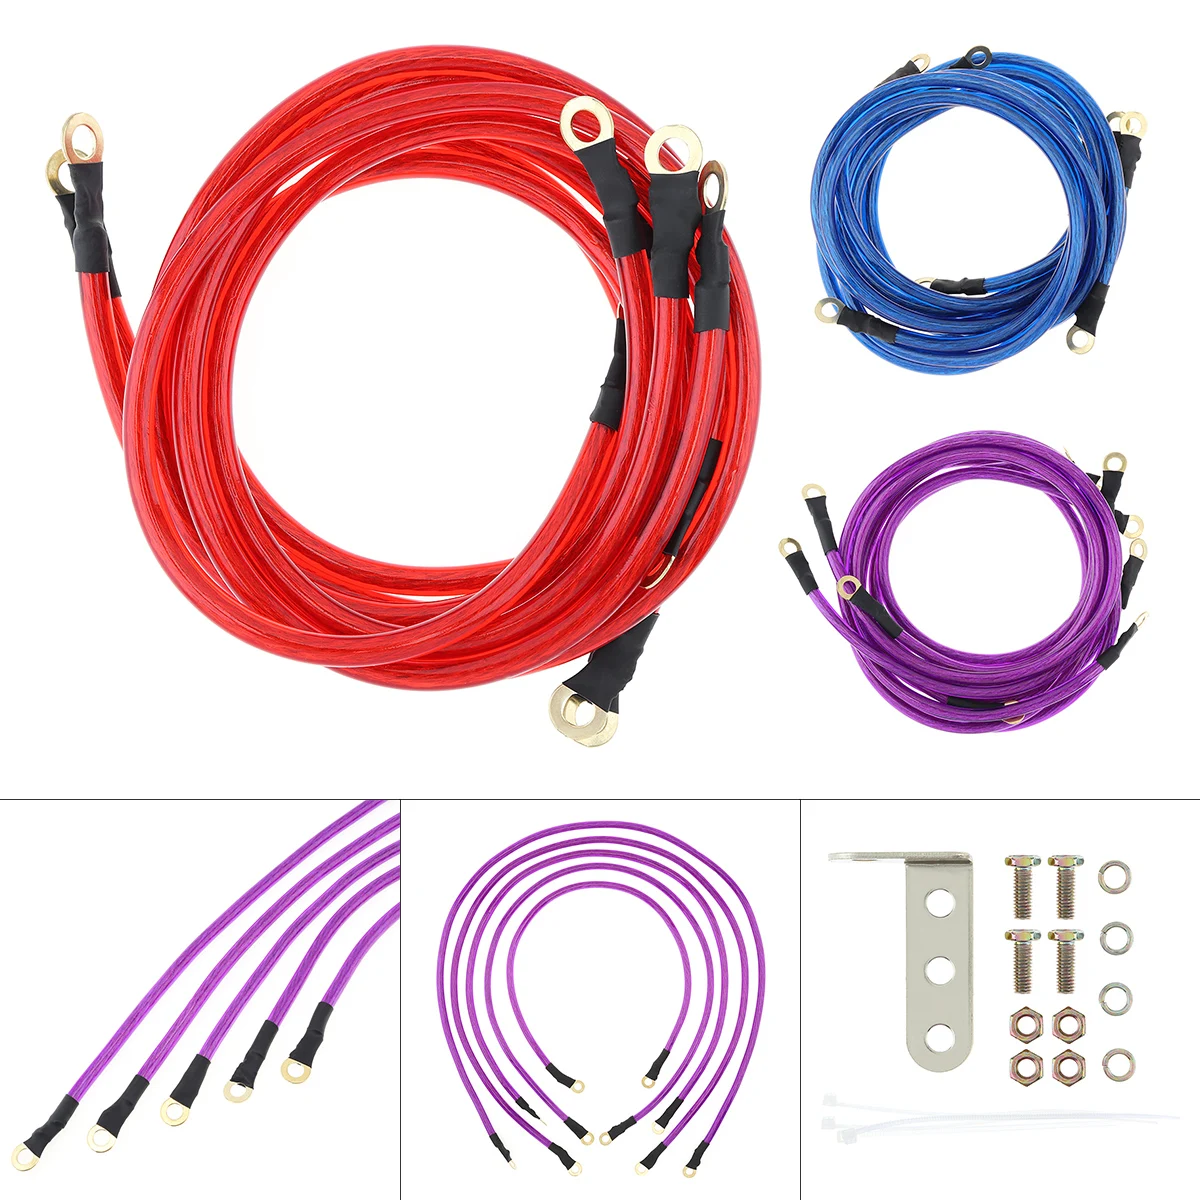 

5 Point Universal Car Earth Ground Wire Grounding Cables System Kit High Performance Improve Power